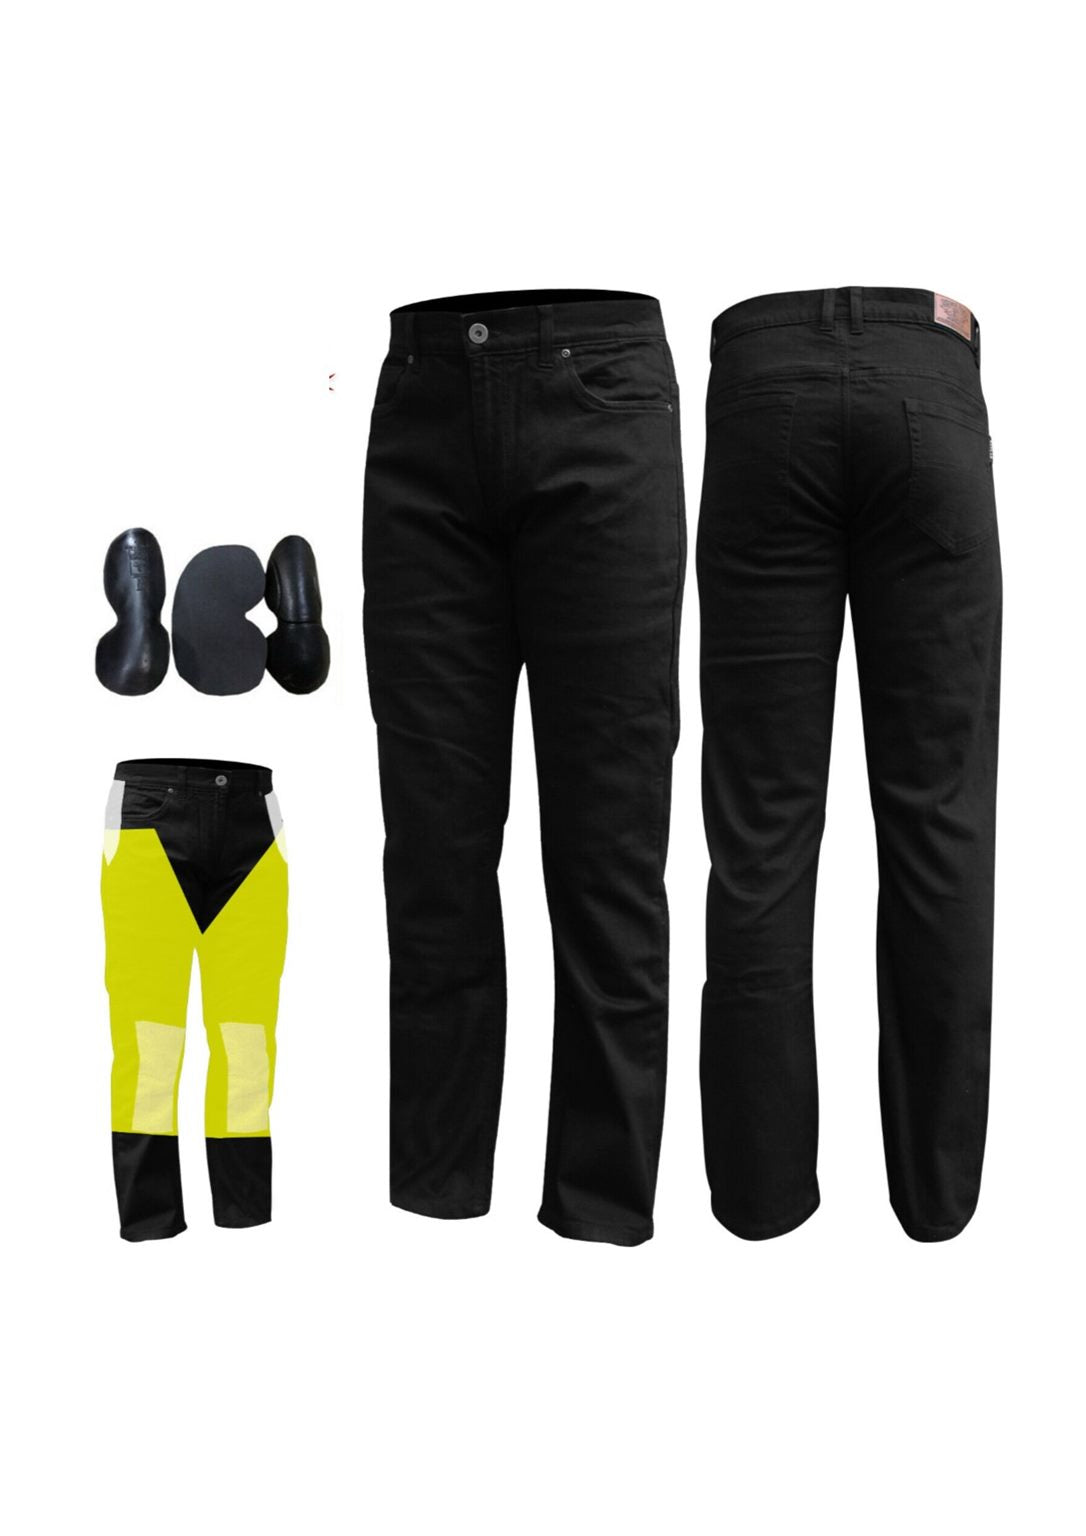 Men Motorcycle Kevlar Jeans - Motorcycle Jeans, with Stretch Panel